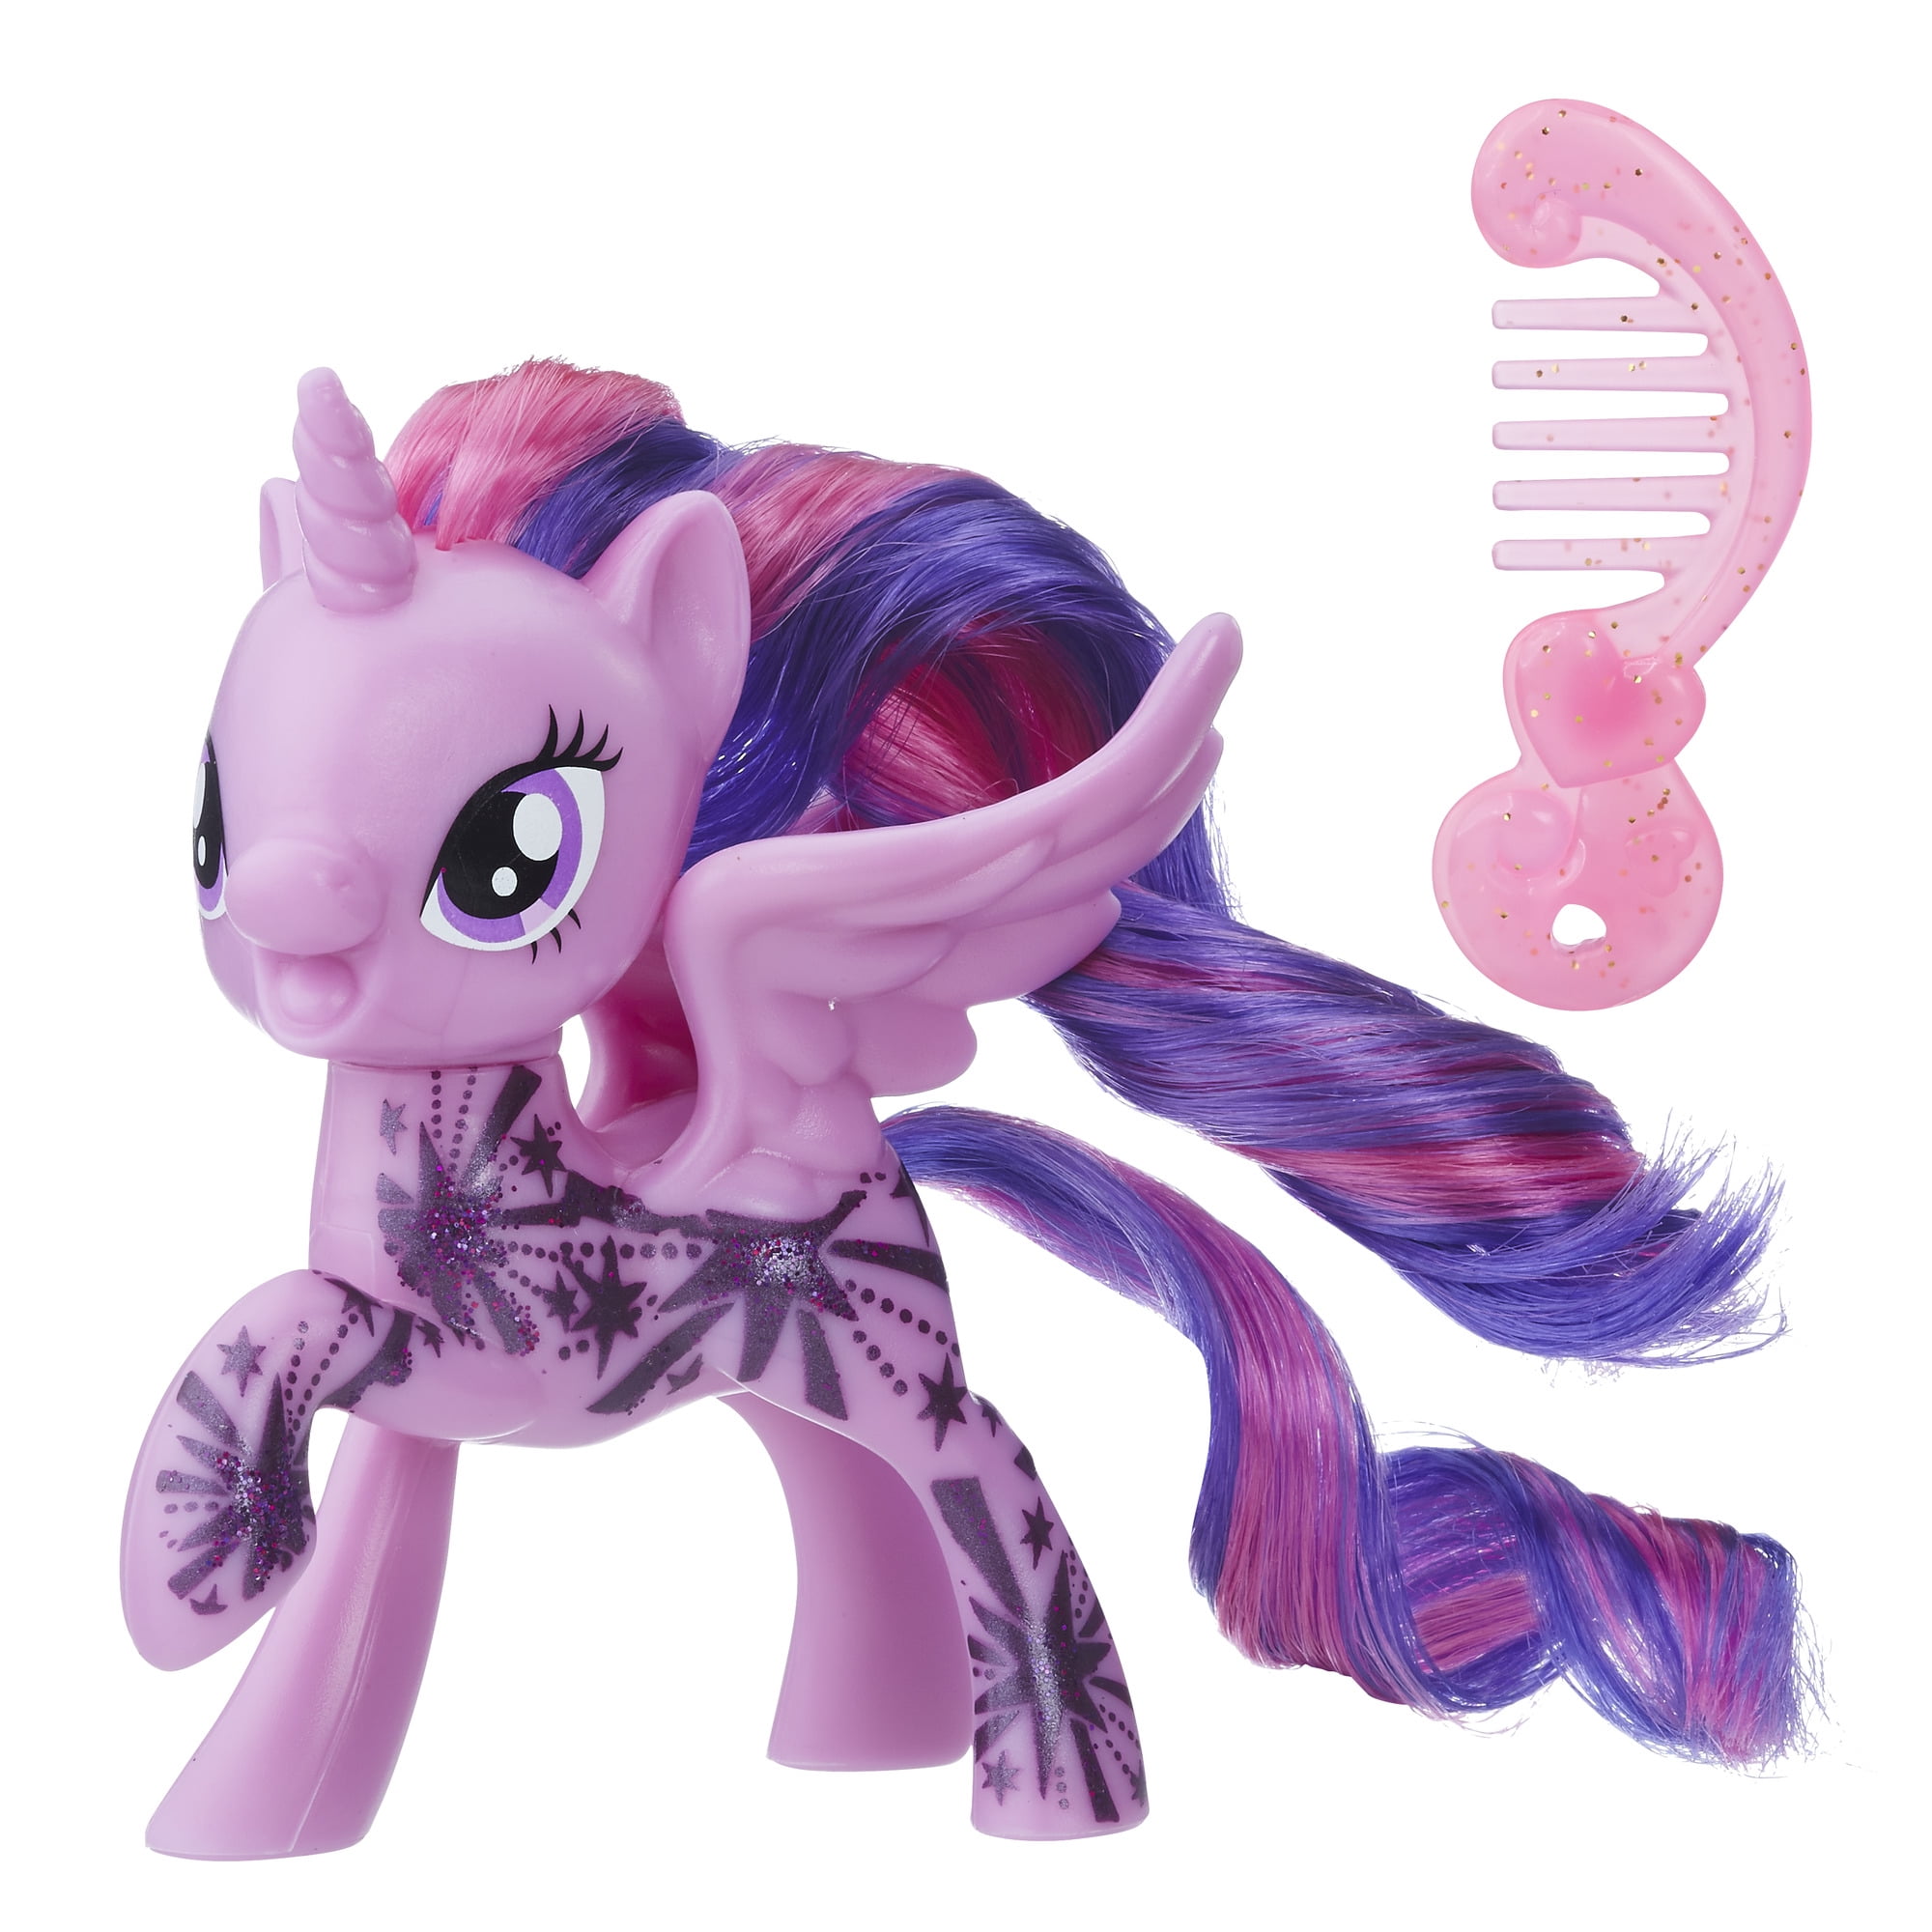 My Little Pony Twilight Sparkle Toy E2928AS0 for sale online 